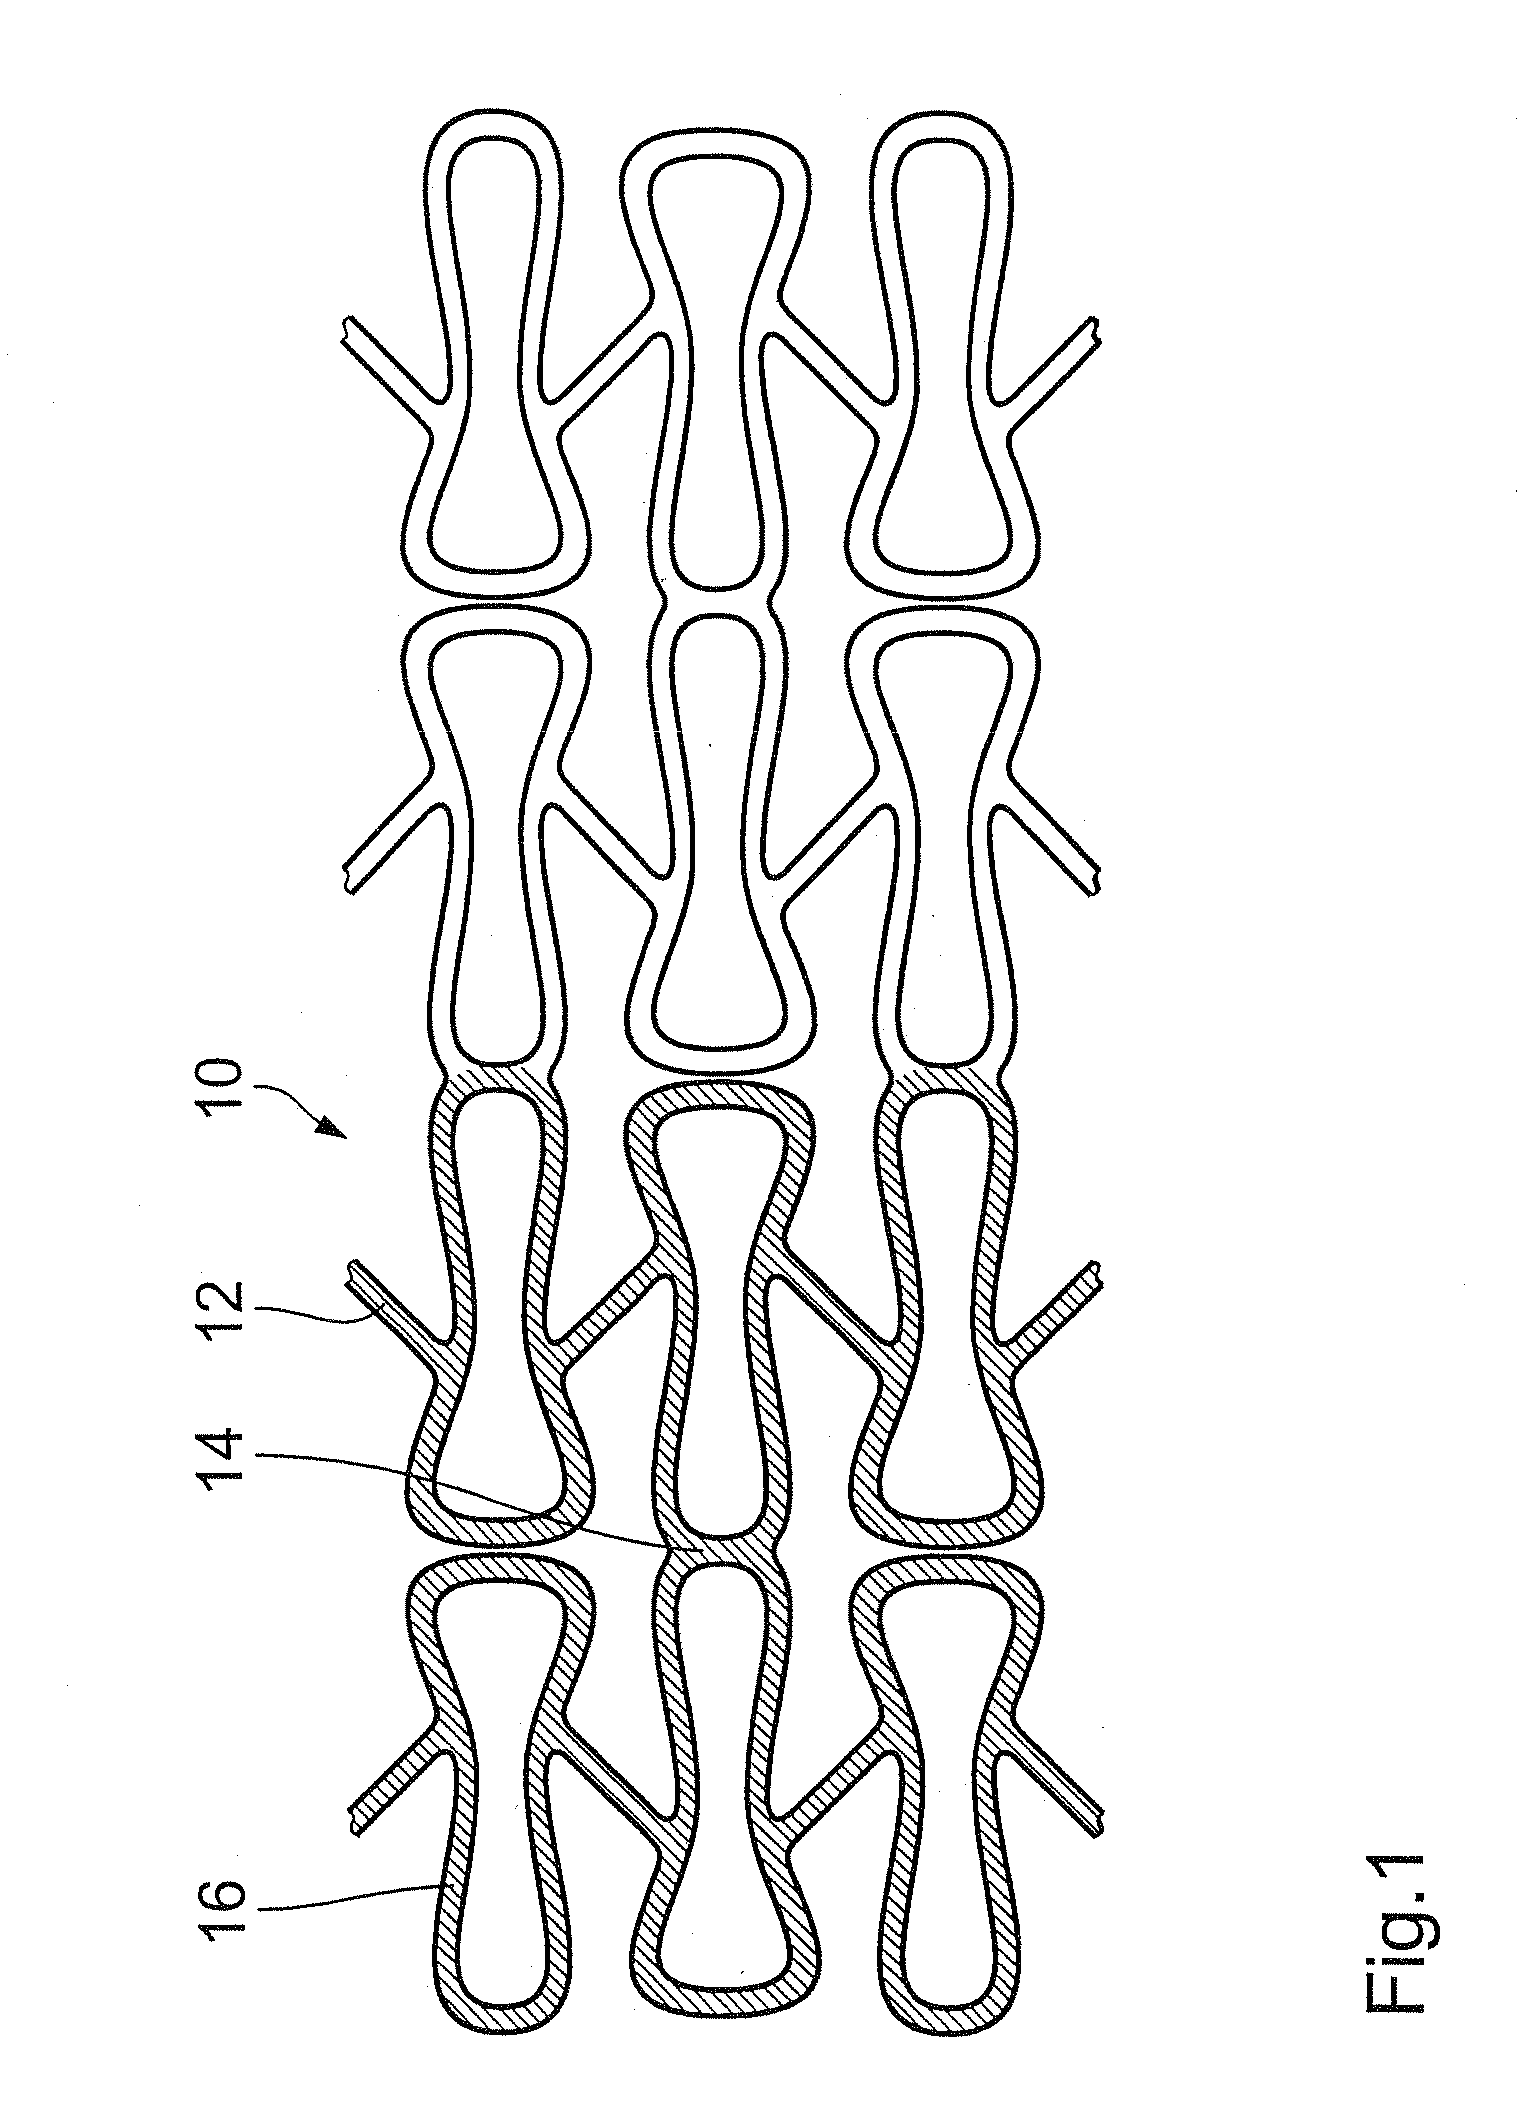 Endovascular implant with active coating